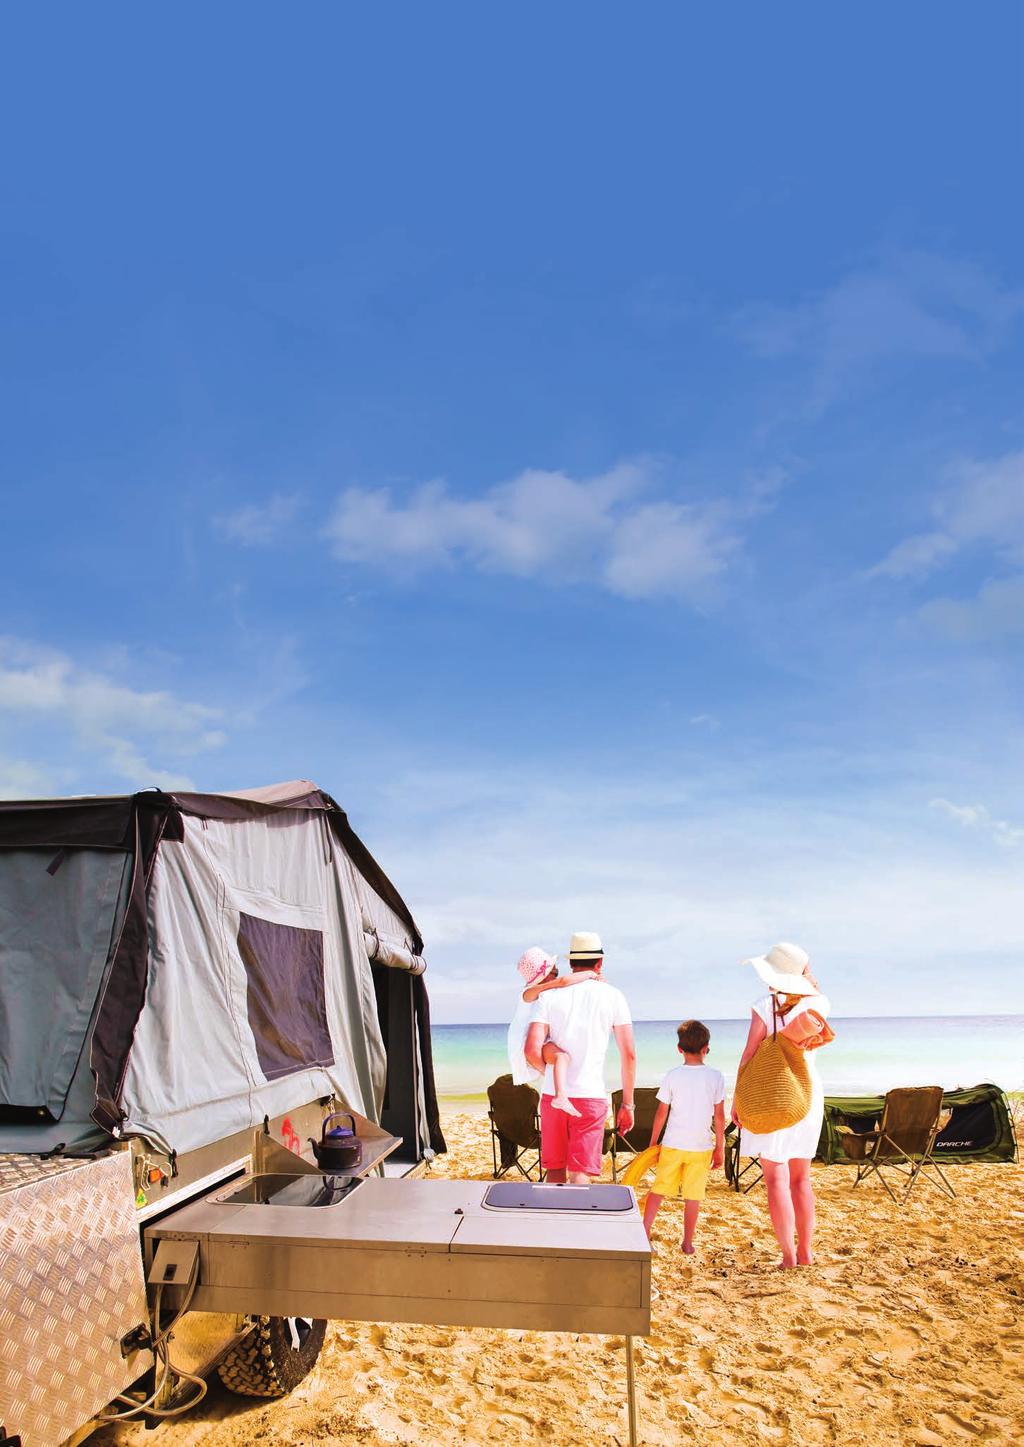 Fabulous for Families Popular Camper Choices for Family Adventures CREATE UNFORGETTABLE HOLIDAYS IN THE HEART OF AUSTRALIA TRAVELLER ESCAPE OVERLANDER DROVER LONGREACH FRONTIER